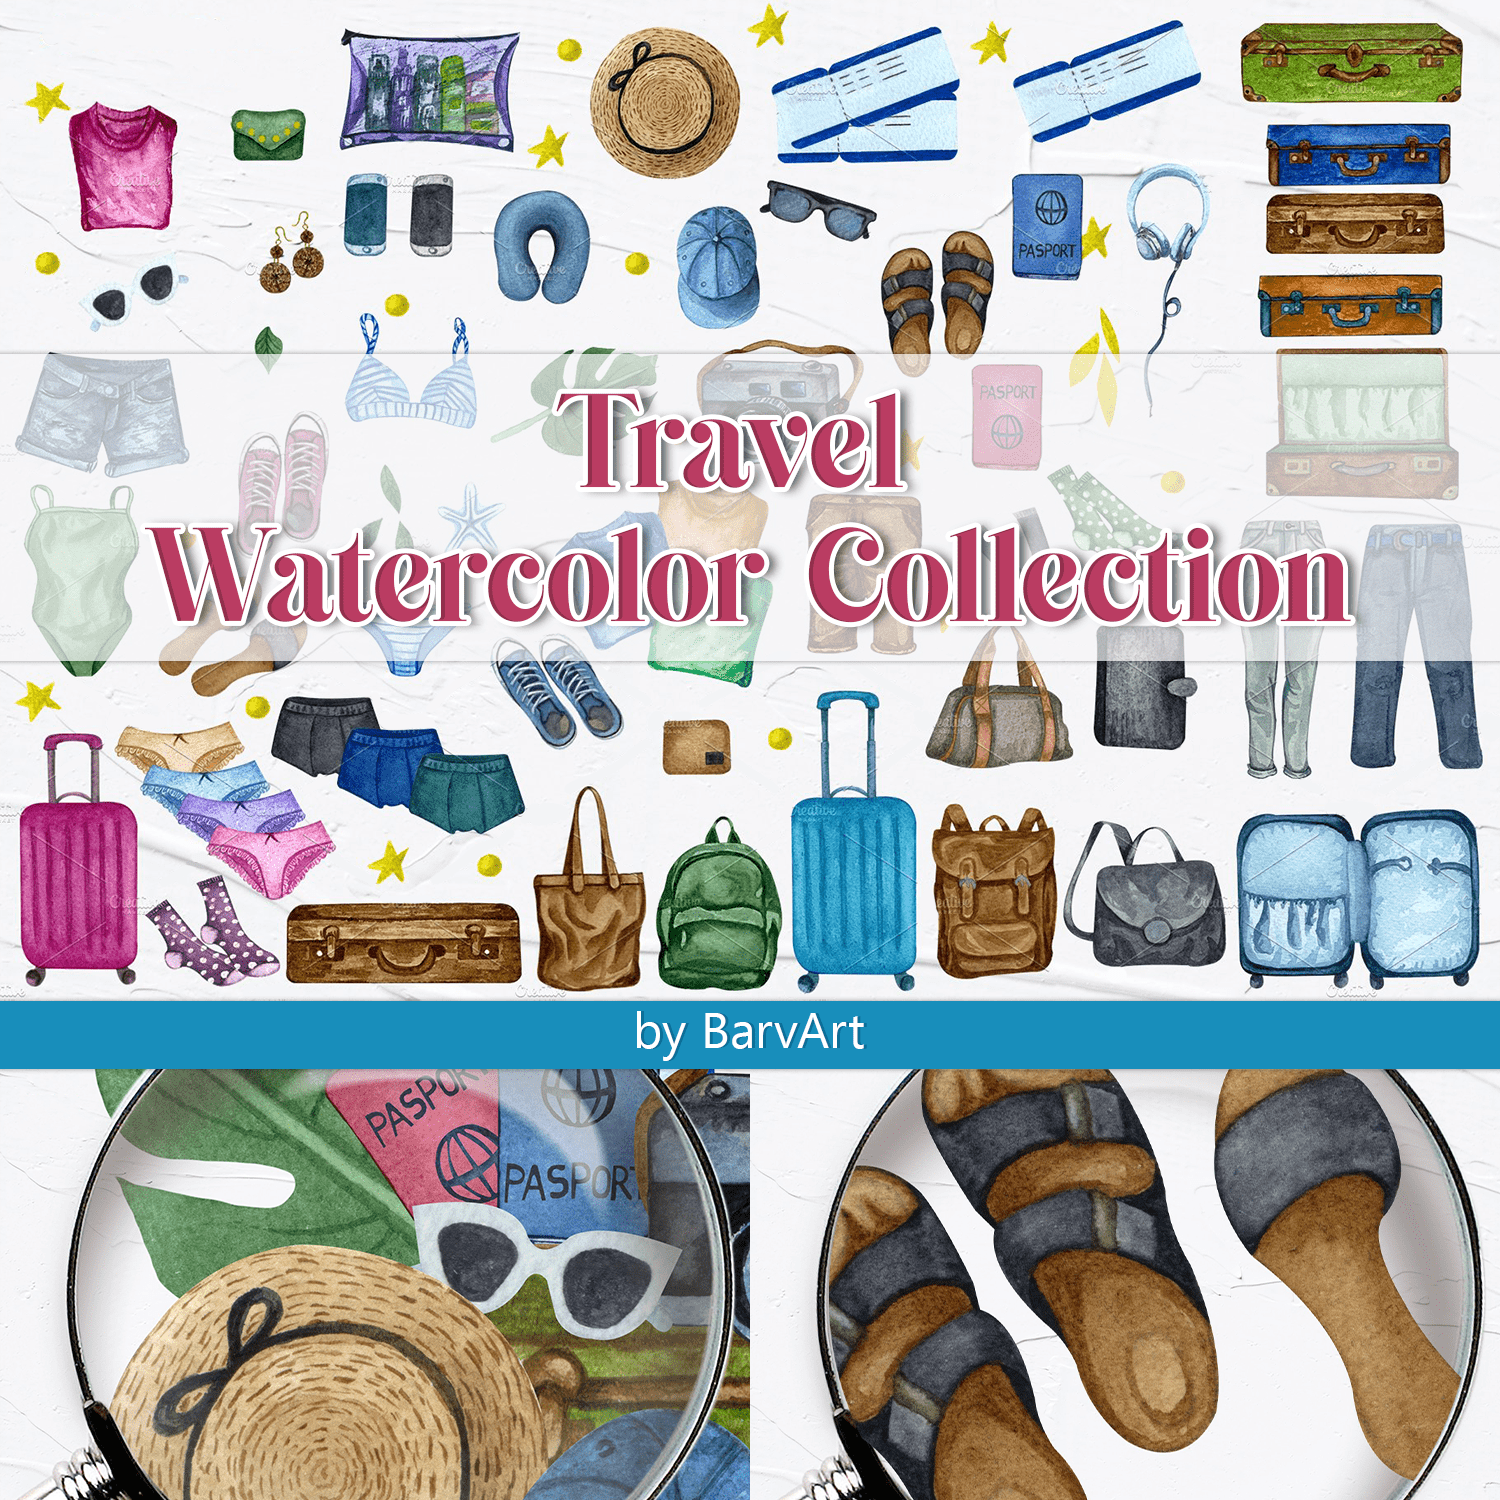 Travel Watercolor Collection cover.